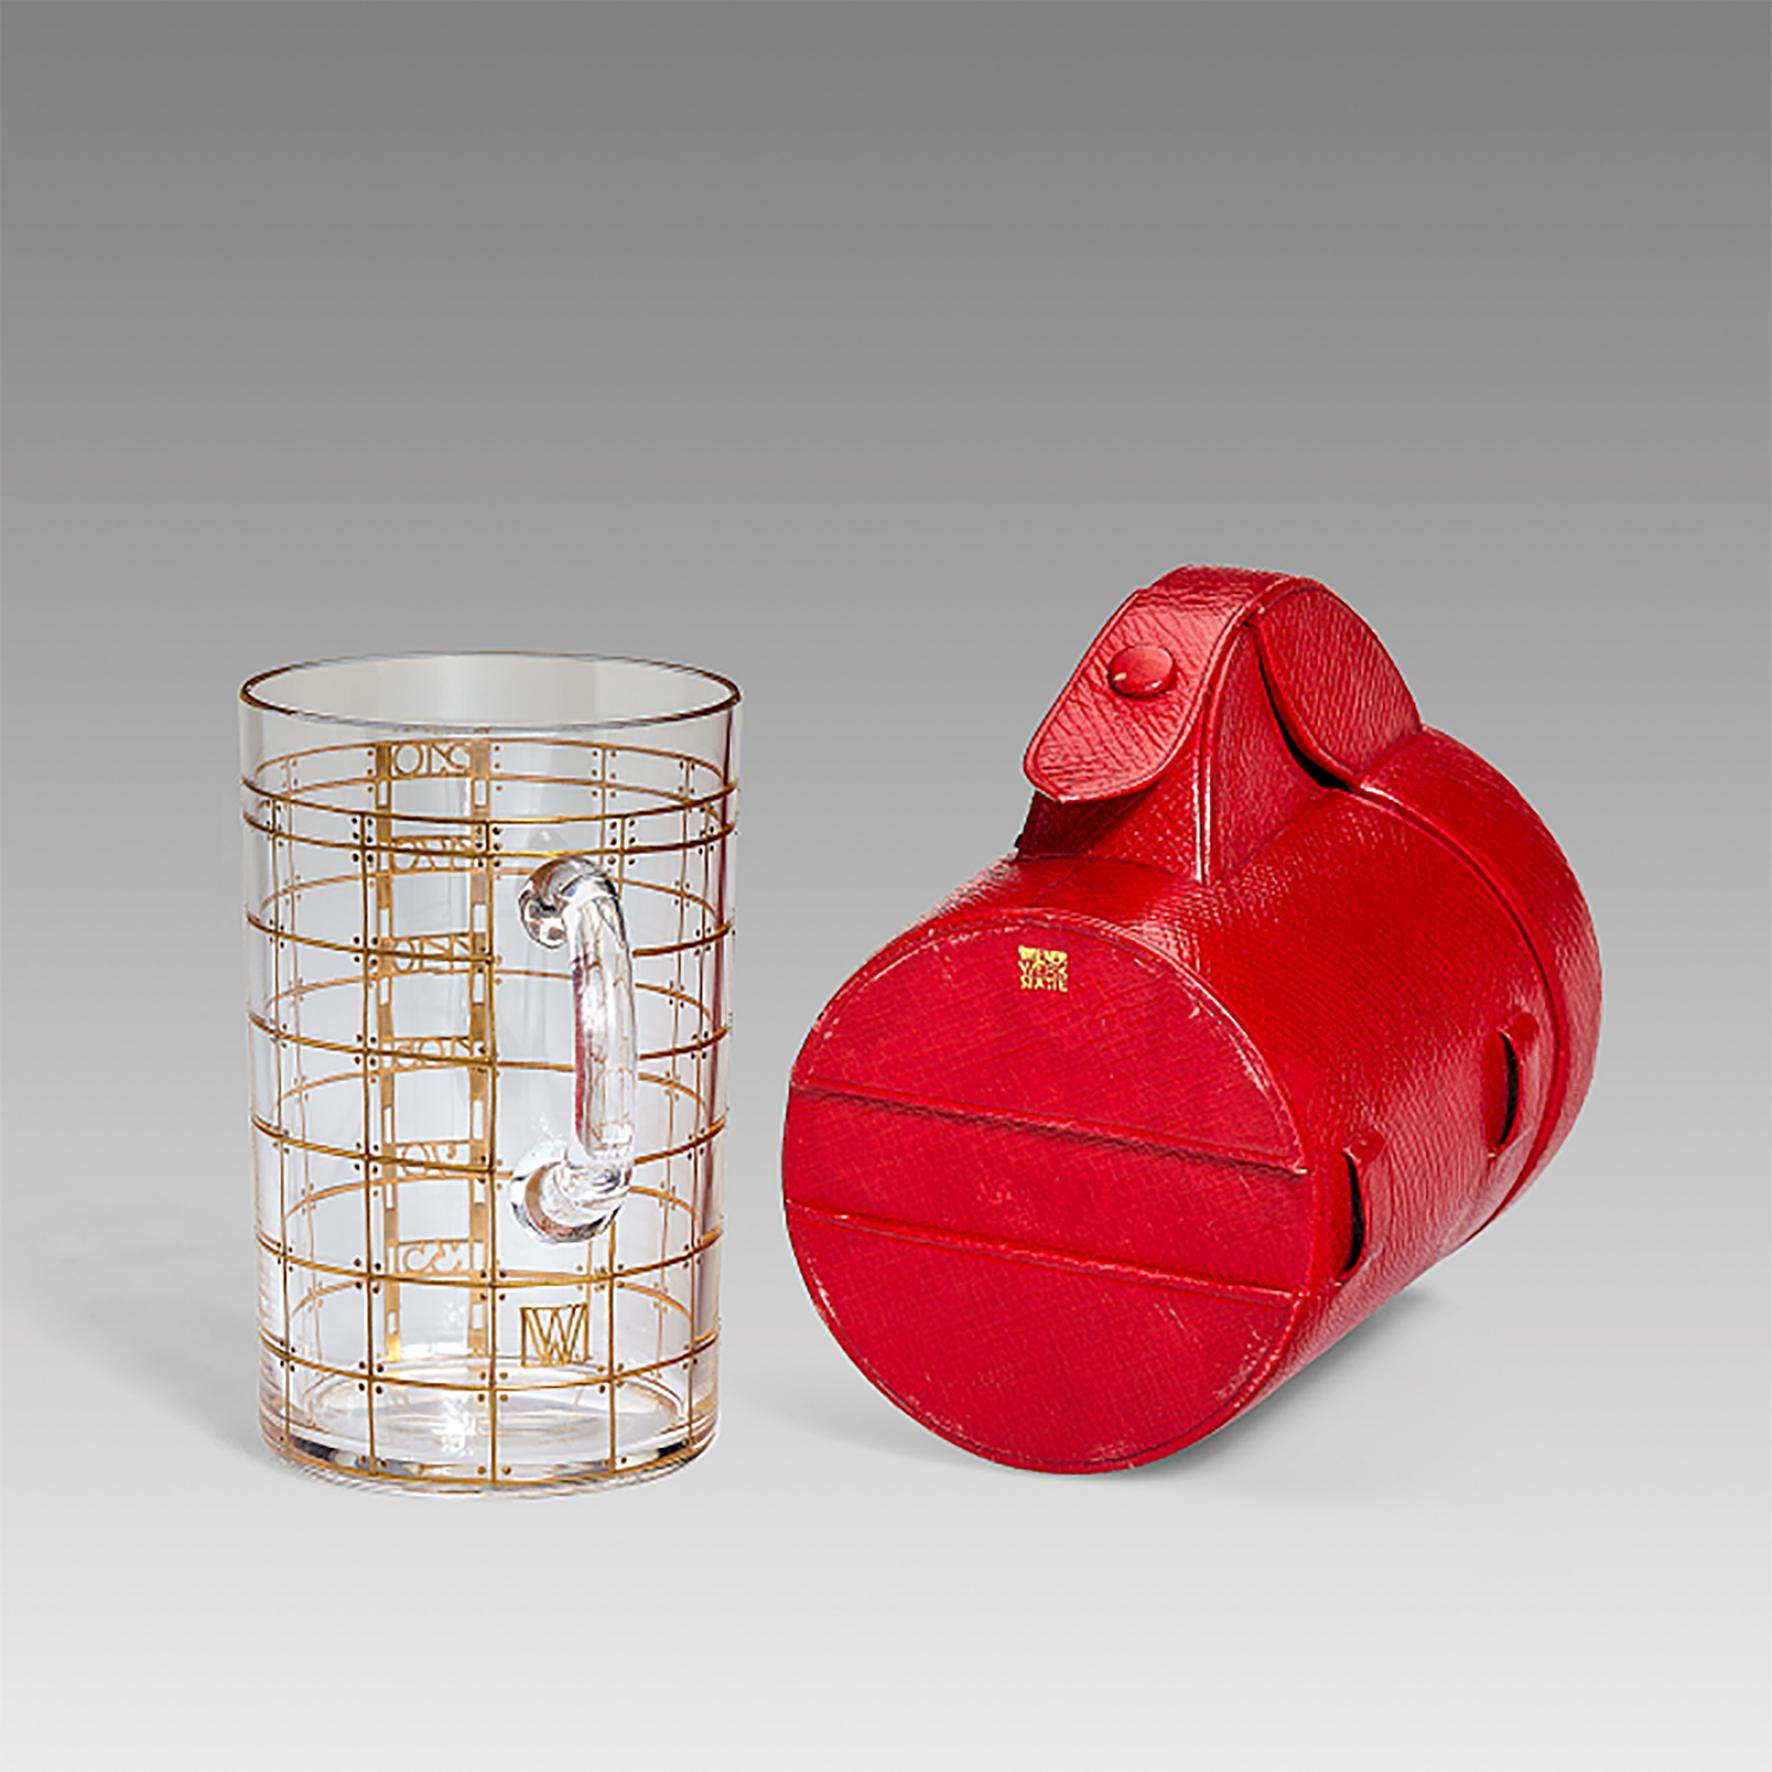 This amazing and rare Art Nouveau glass measuring cup with its matching red leather case has been manufactured by Wiener Werkstätte in Vienna ca 1915 and exemplifies the philosophy of the Wiener Werkstätte: to combine the best design with